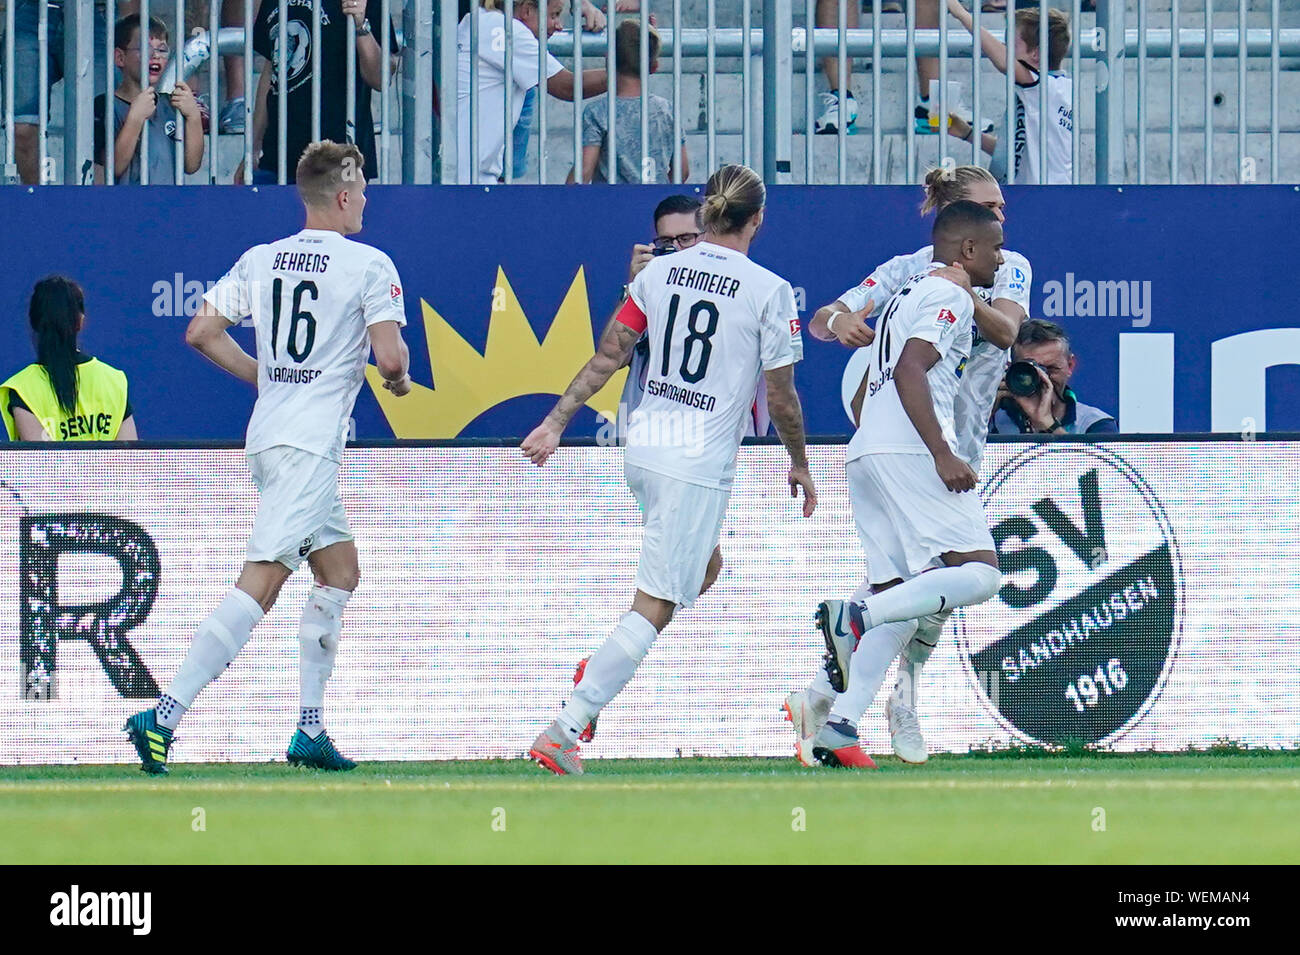 Sandhausen, Germany. 30th Aug, 2019. Soccer: 2nd Bundesliga, SV Sandhausen - SV Darmstadt 98, 5th matchday, in Hardtwaldstadion. Sandhausen's scorer Erik Zenga (r) rejoices with his team-mates over the goal to 1-0. Credit: Uwe Anspach/dpa - IMPORTANT NOTE: In accordance with the requirements of the DFL Deutsche Fußball Liga or the DFB Deutscher Fußball-Bund, it is prohibited to use or have used photographs taken in the stadium and/or the match in the form of sequence images and/or video-like photo sequences./dpa/Alamy Live News Stock Photo